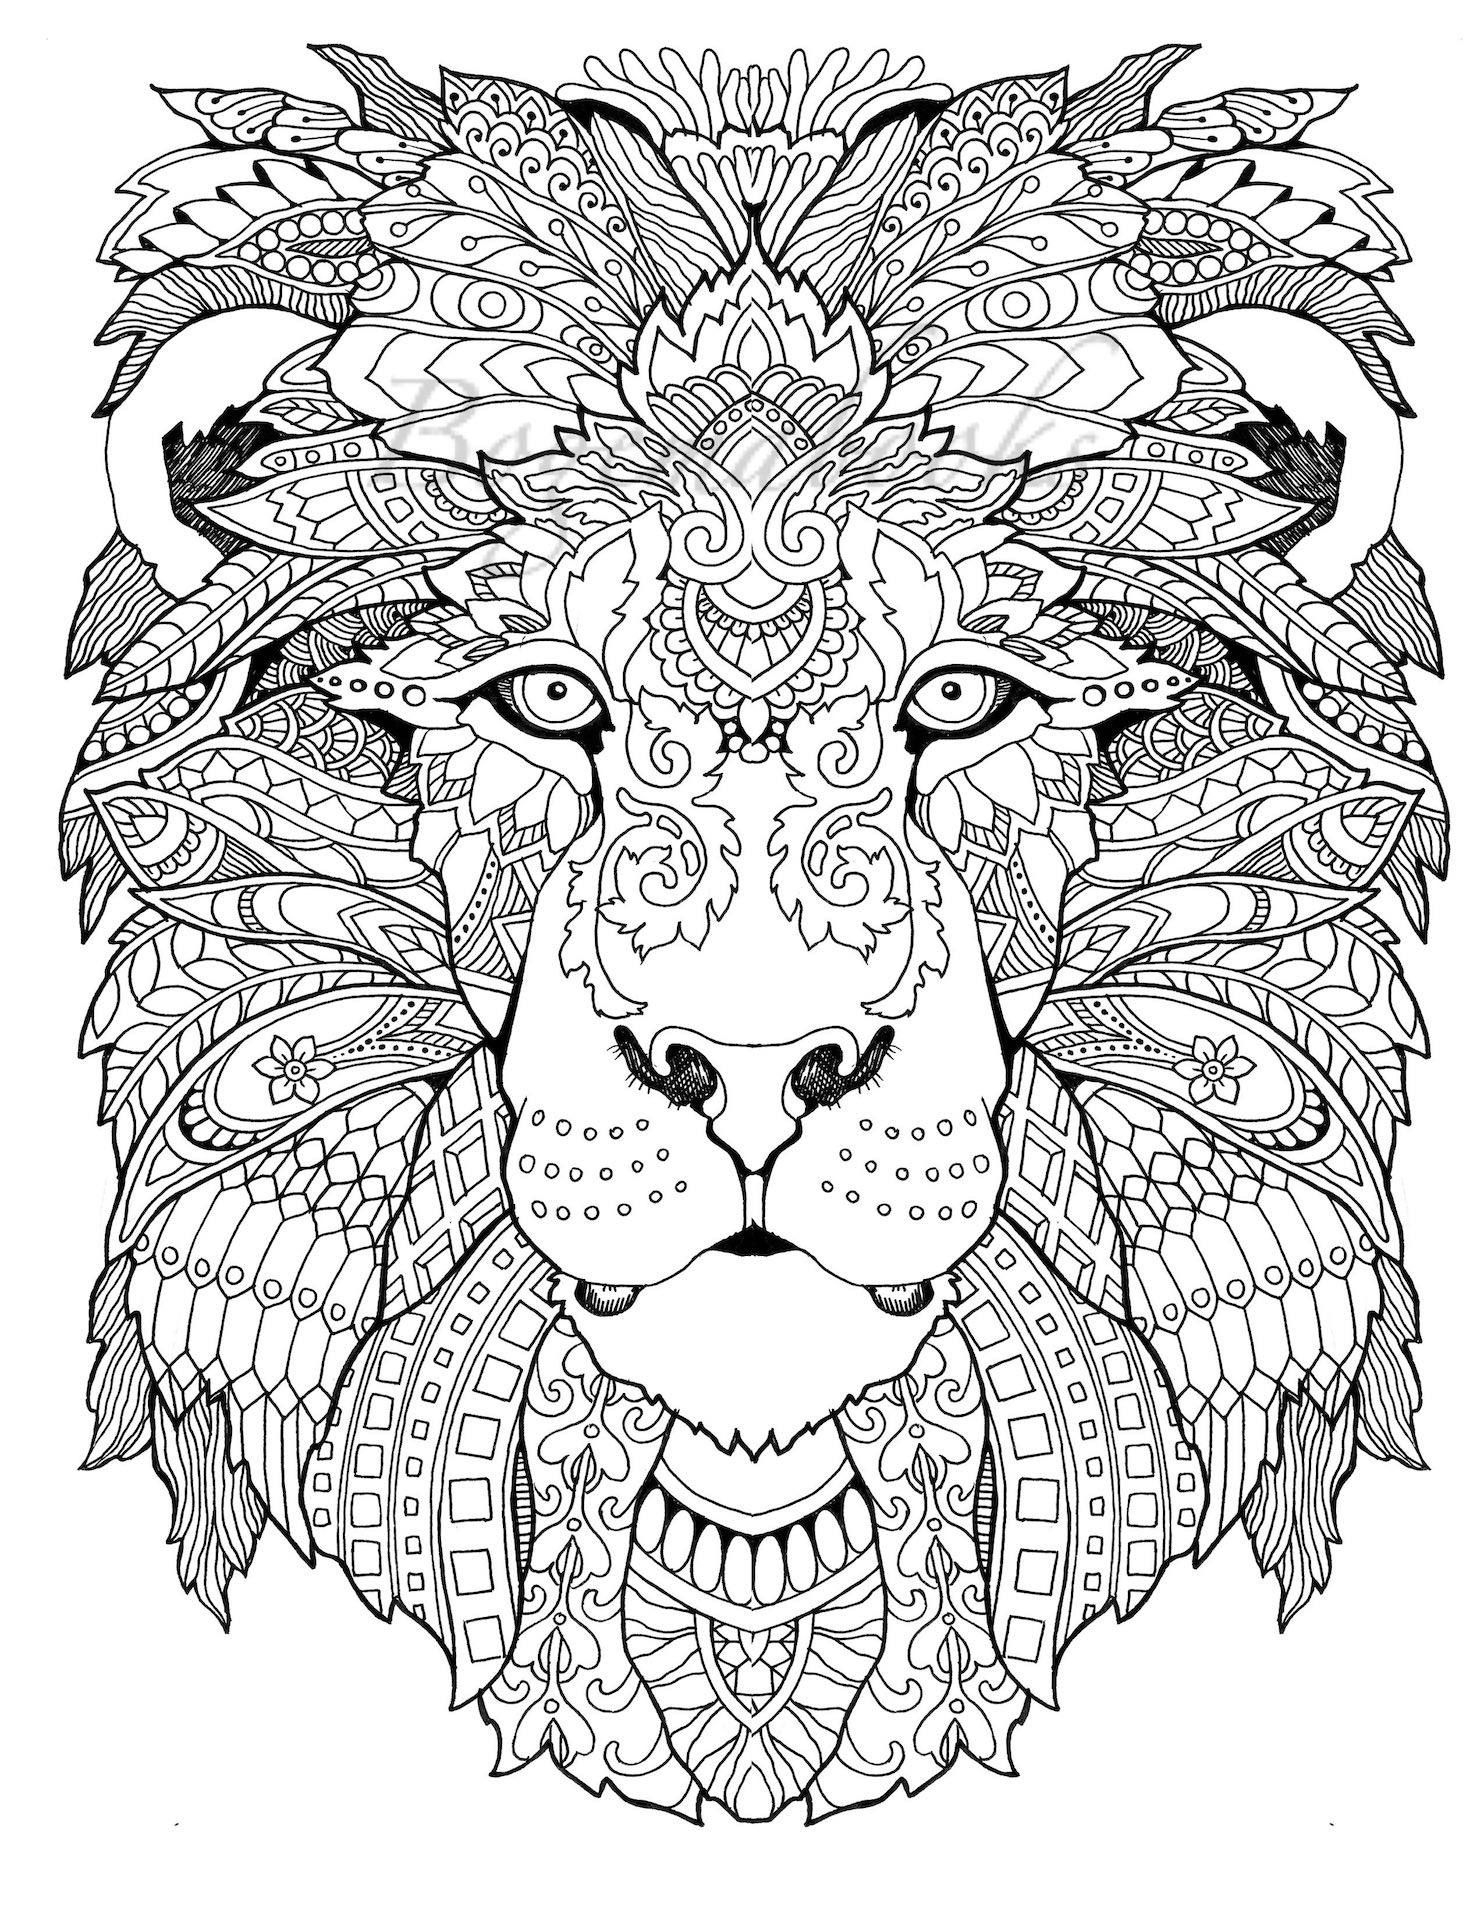 Awesome Animals Adult Coloring Book Coloring Pages Pdf | Awesome - Free Printable Mandalas Pdf